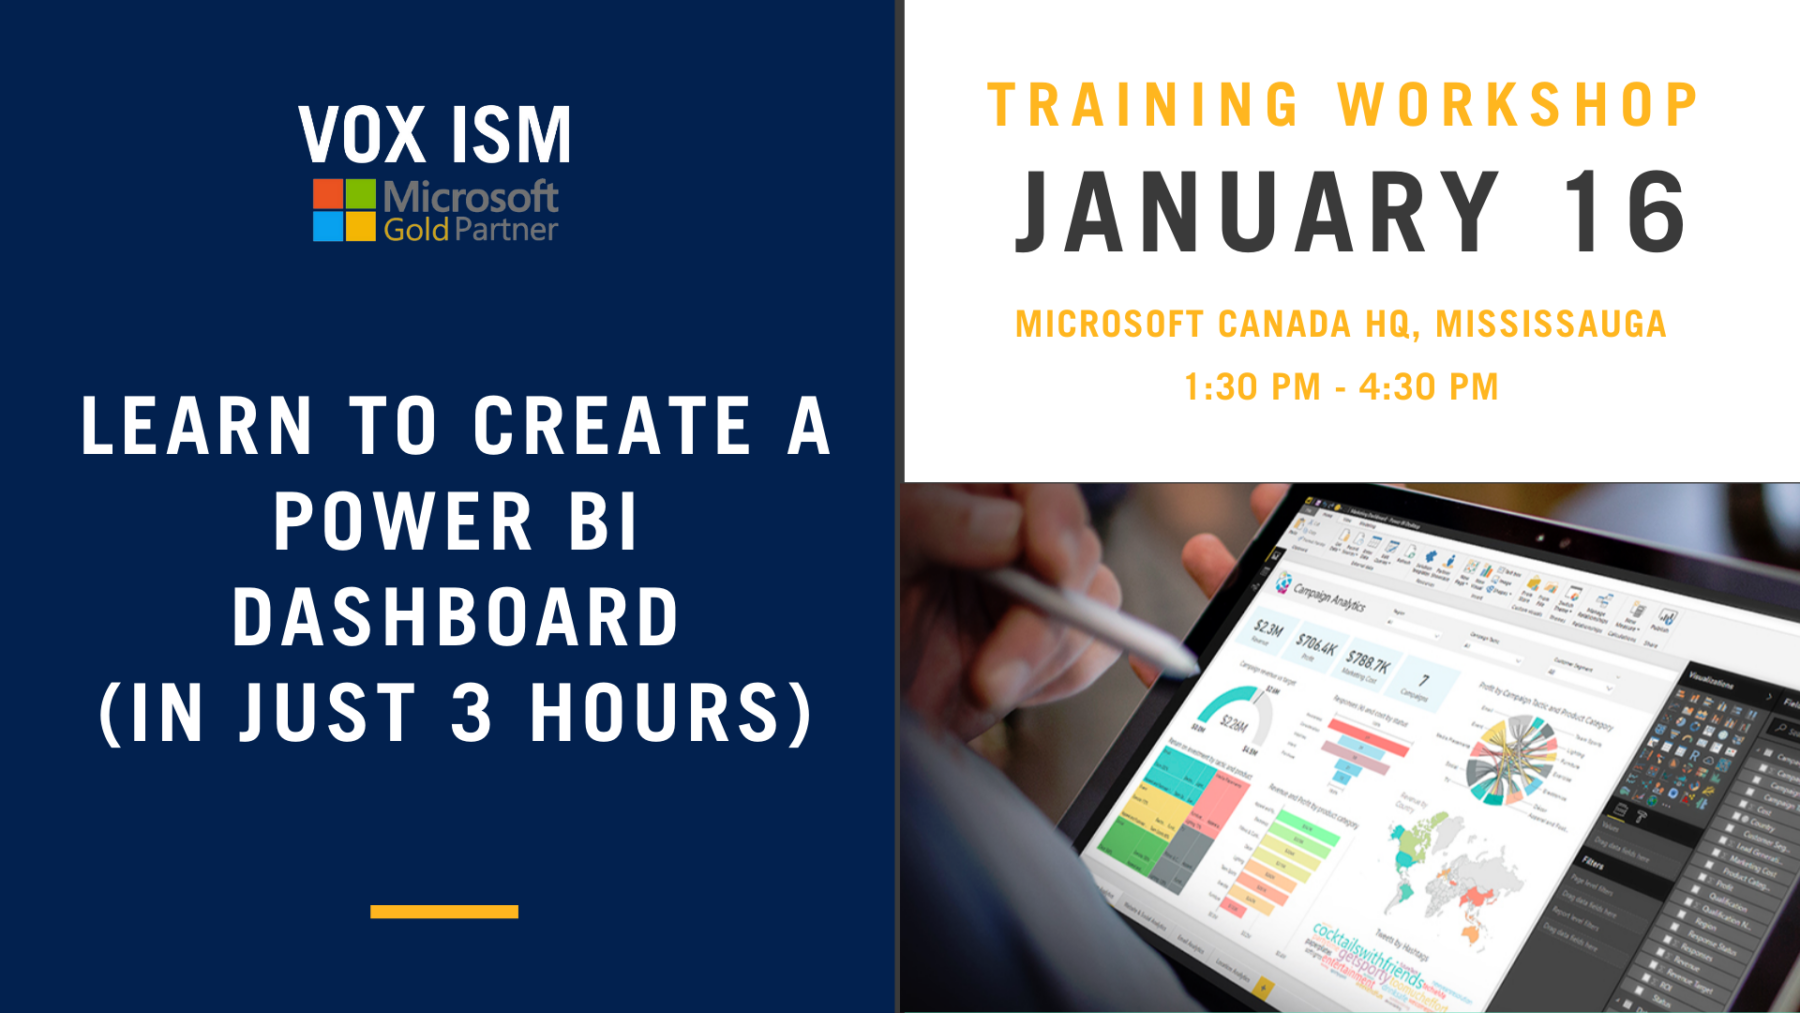 Learn to create Power BI Dashboards - VOX ISM Event